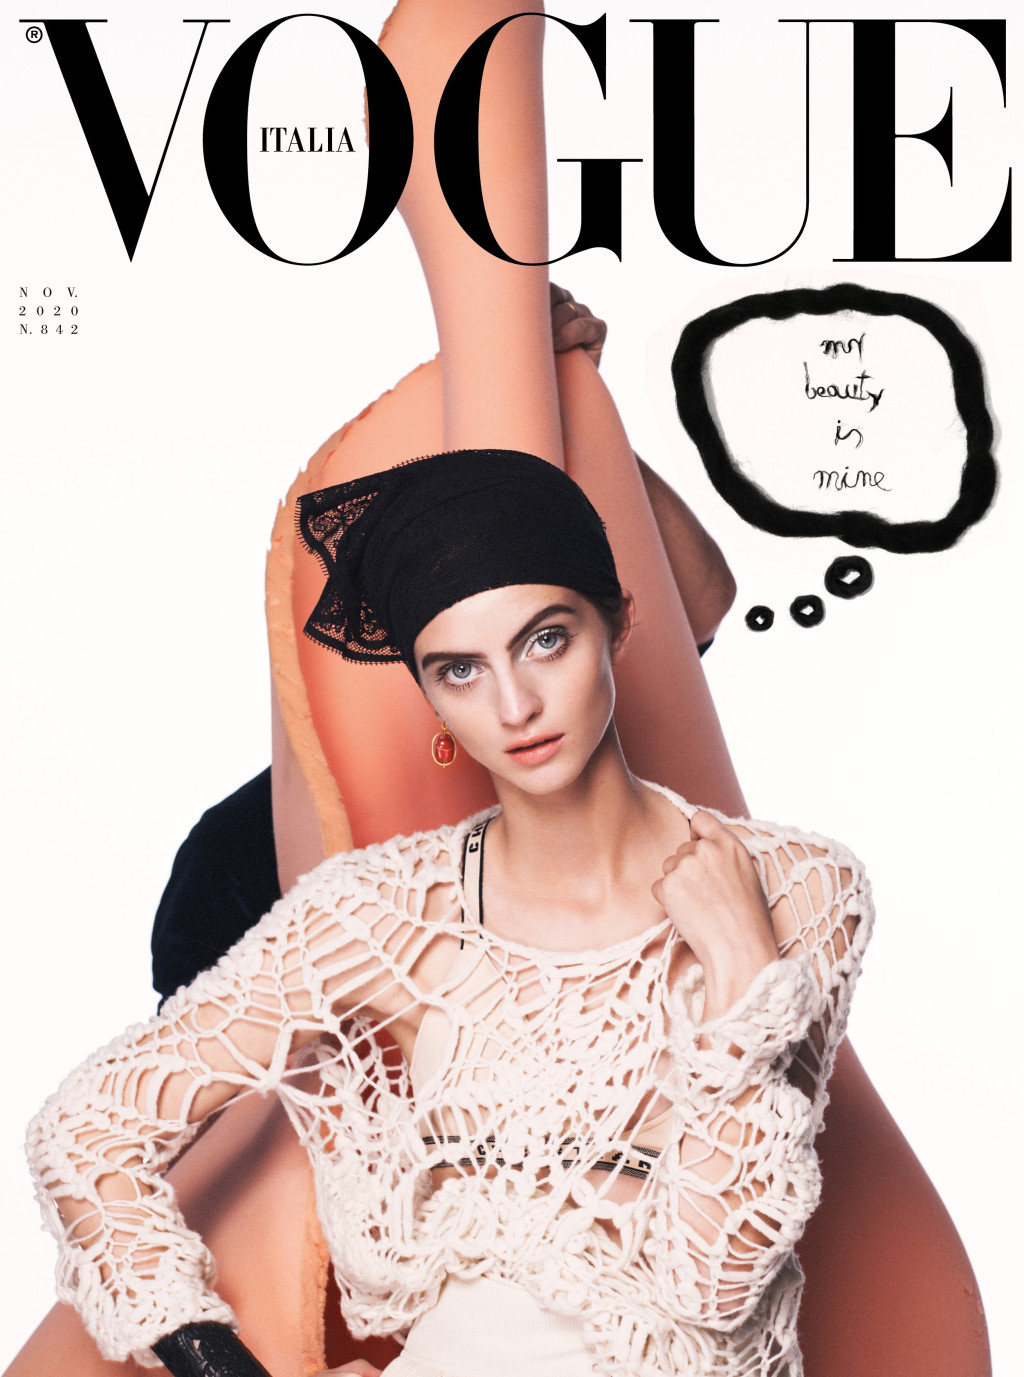 The cover of Vogue Italia's November issue.